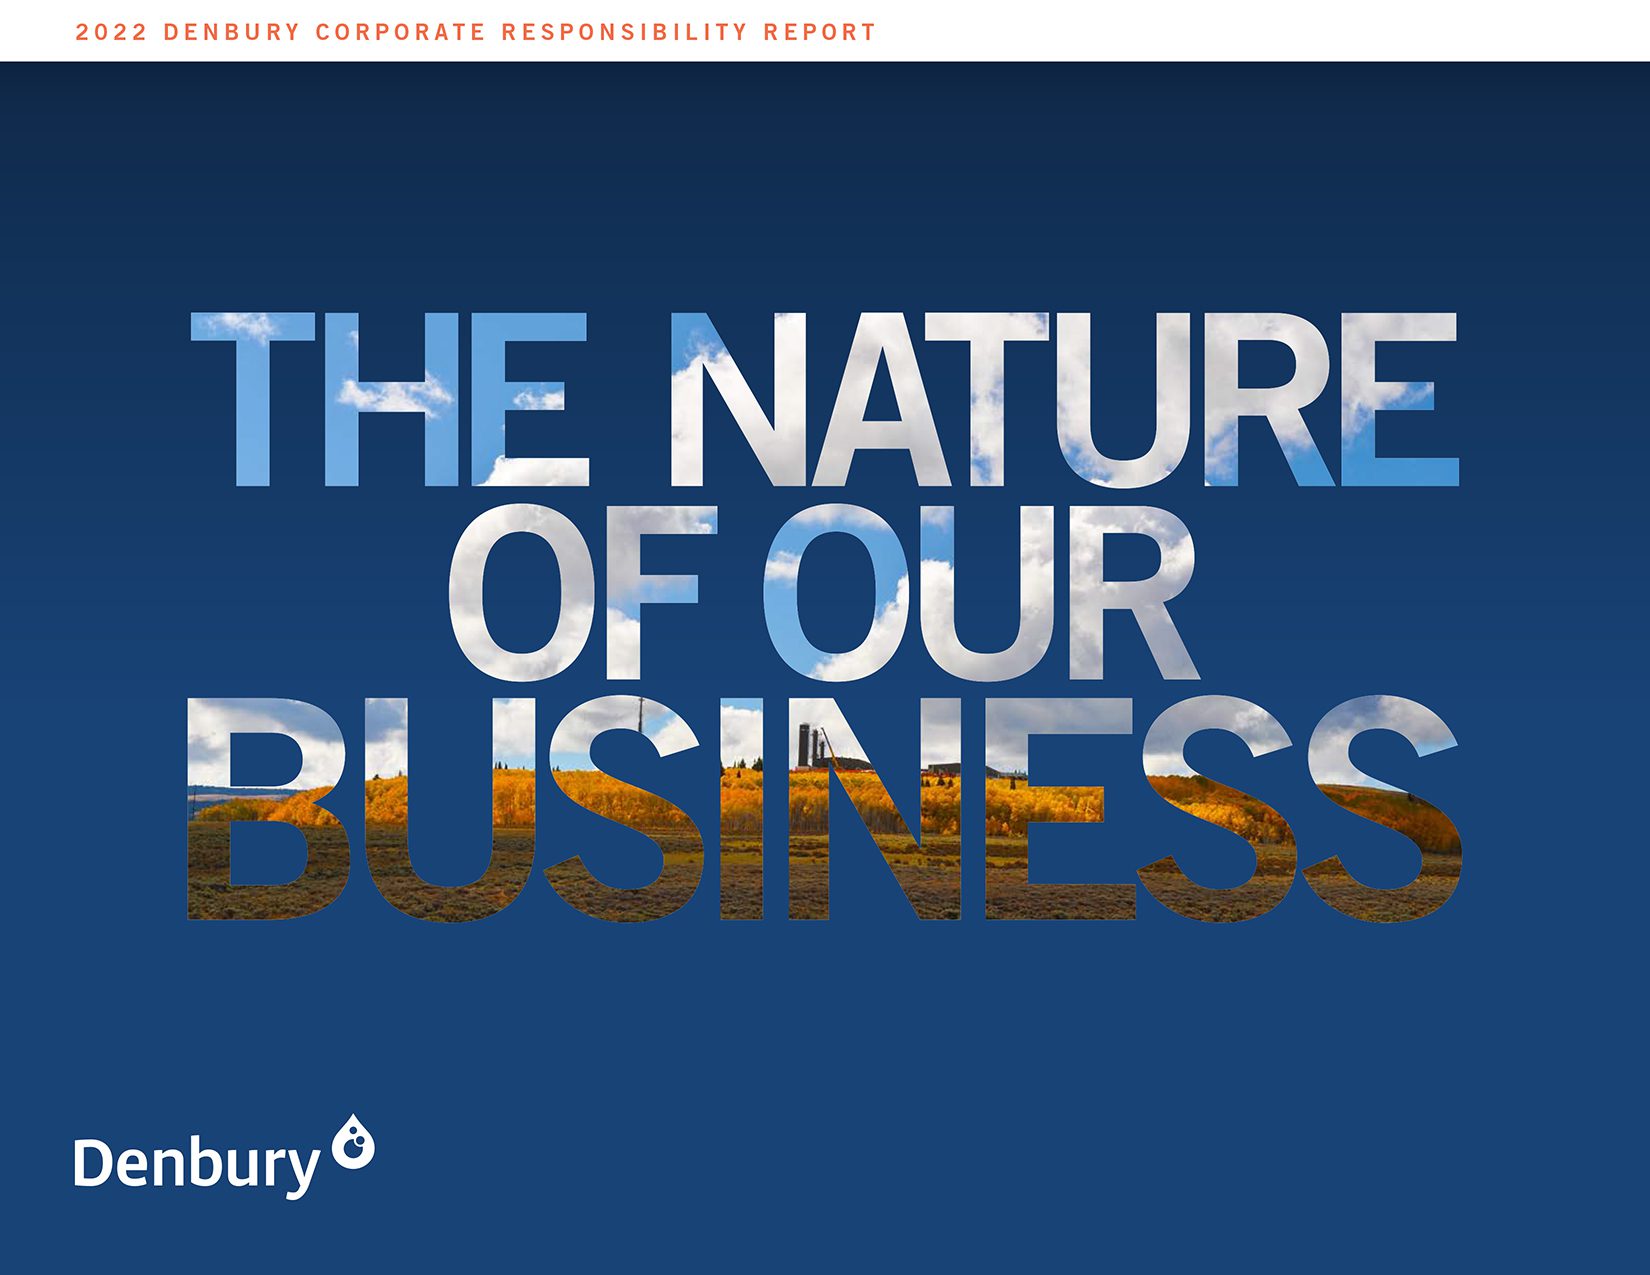 For more information about Denbury’s community involvement see our 2022 Corporate Responsibility Report.